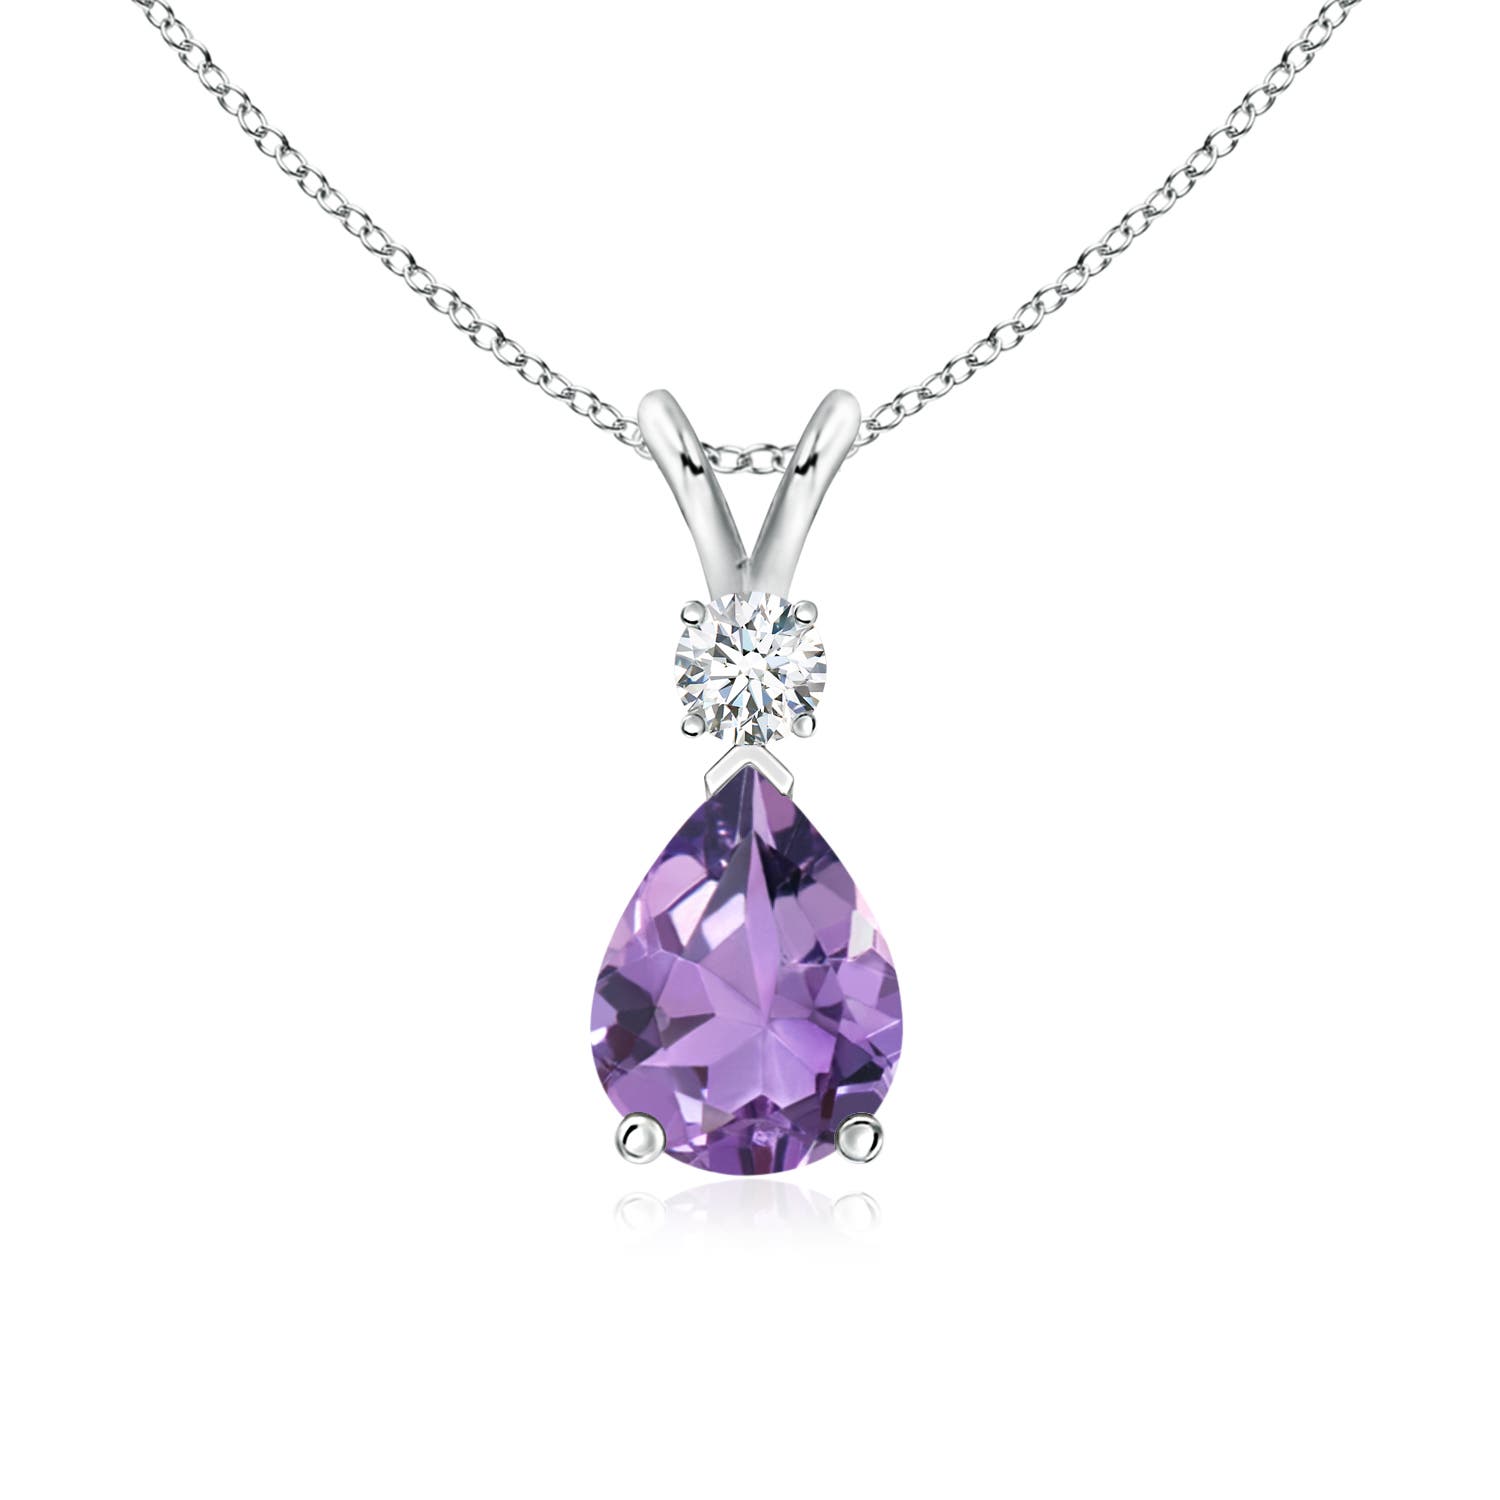 A - Amethyst / 1.11 CT / 14 KT White Gold